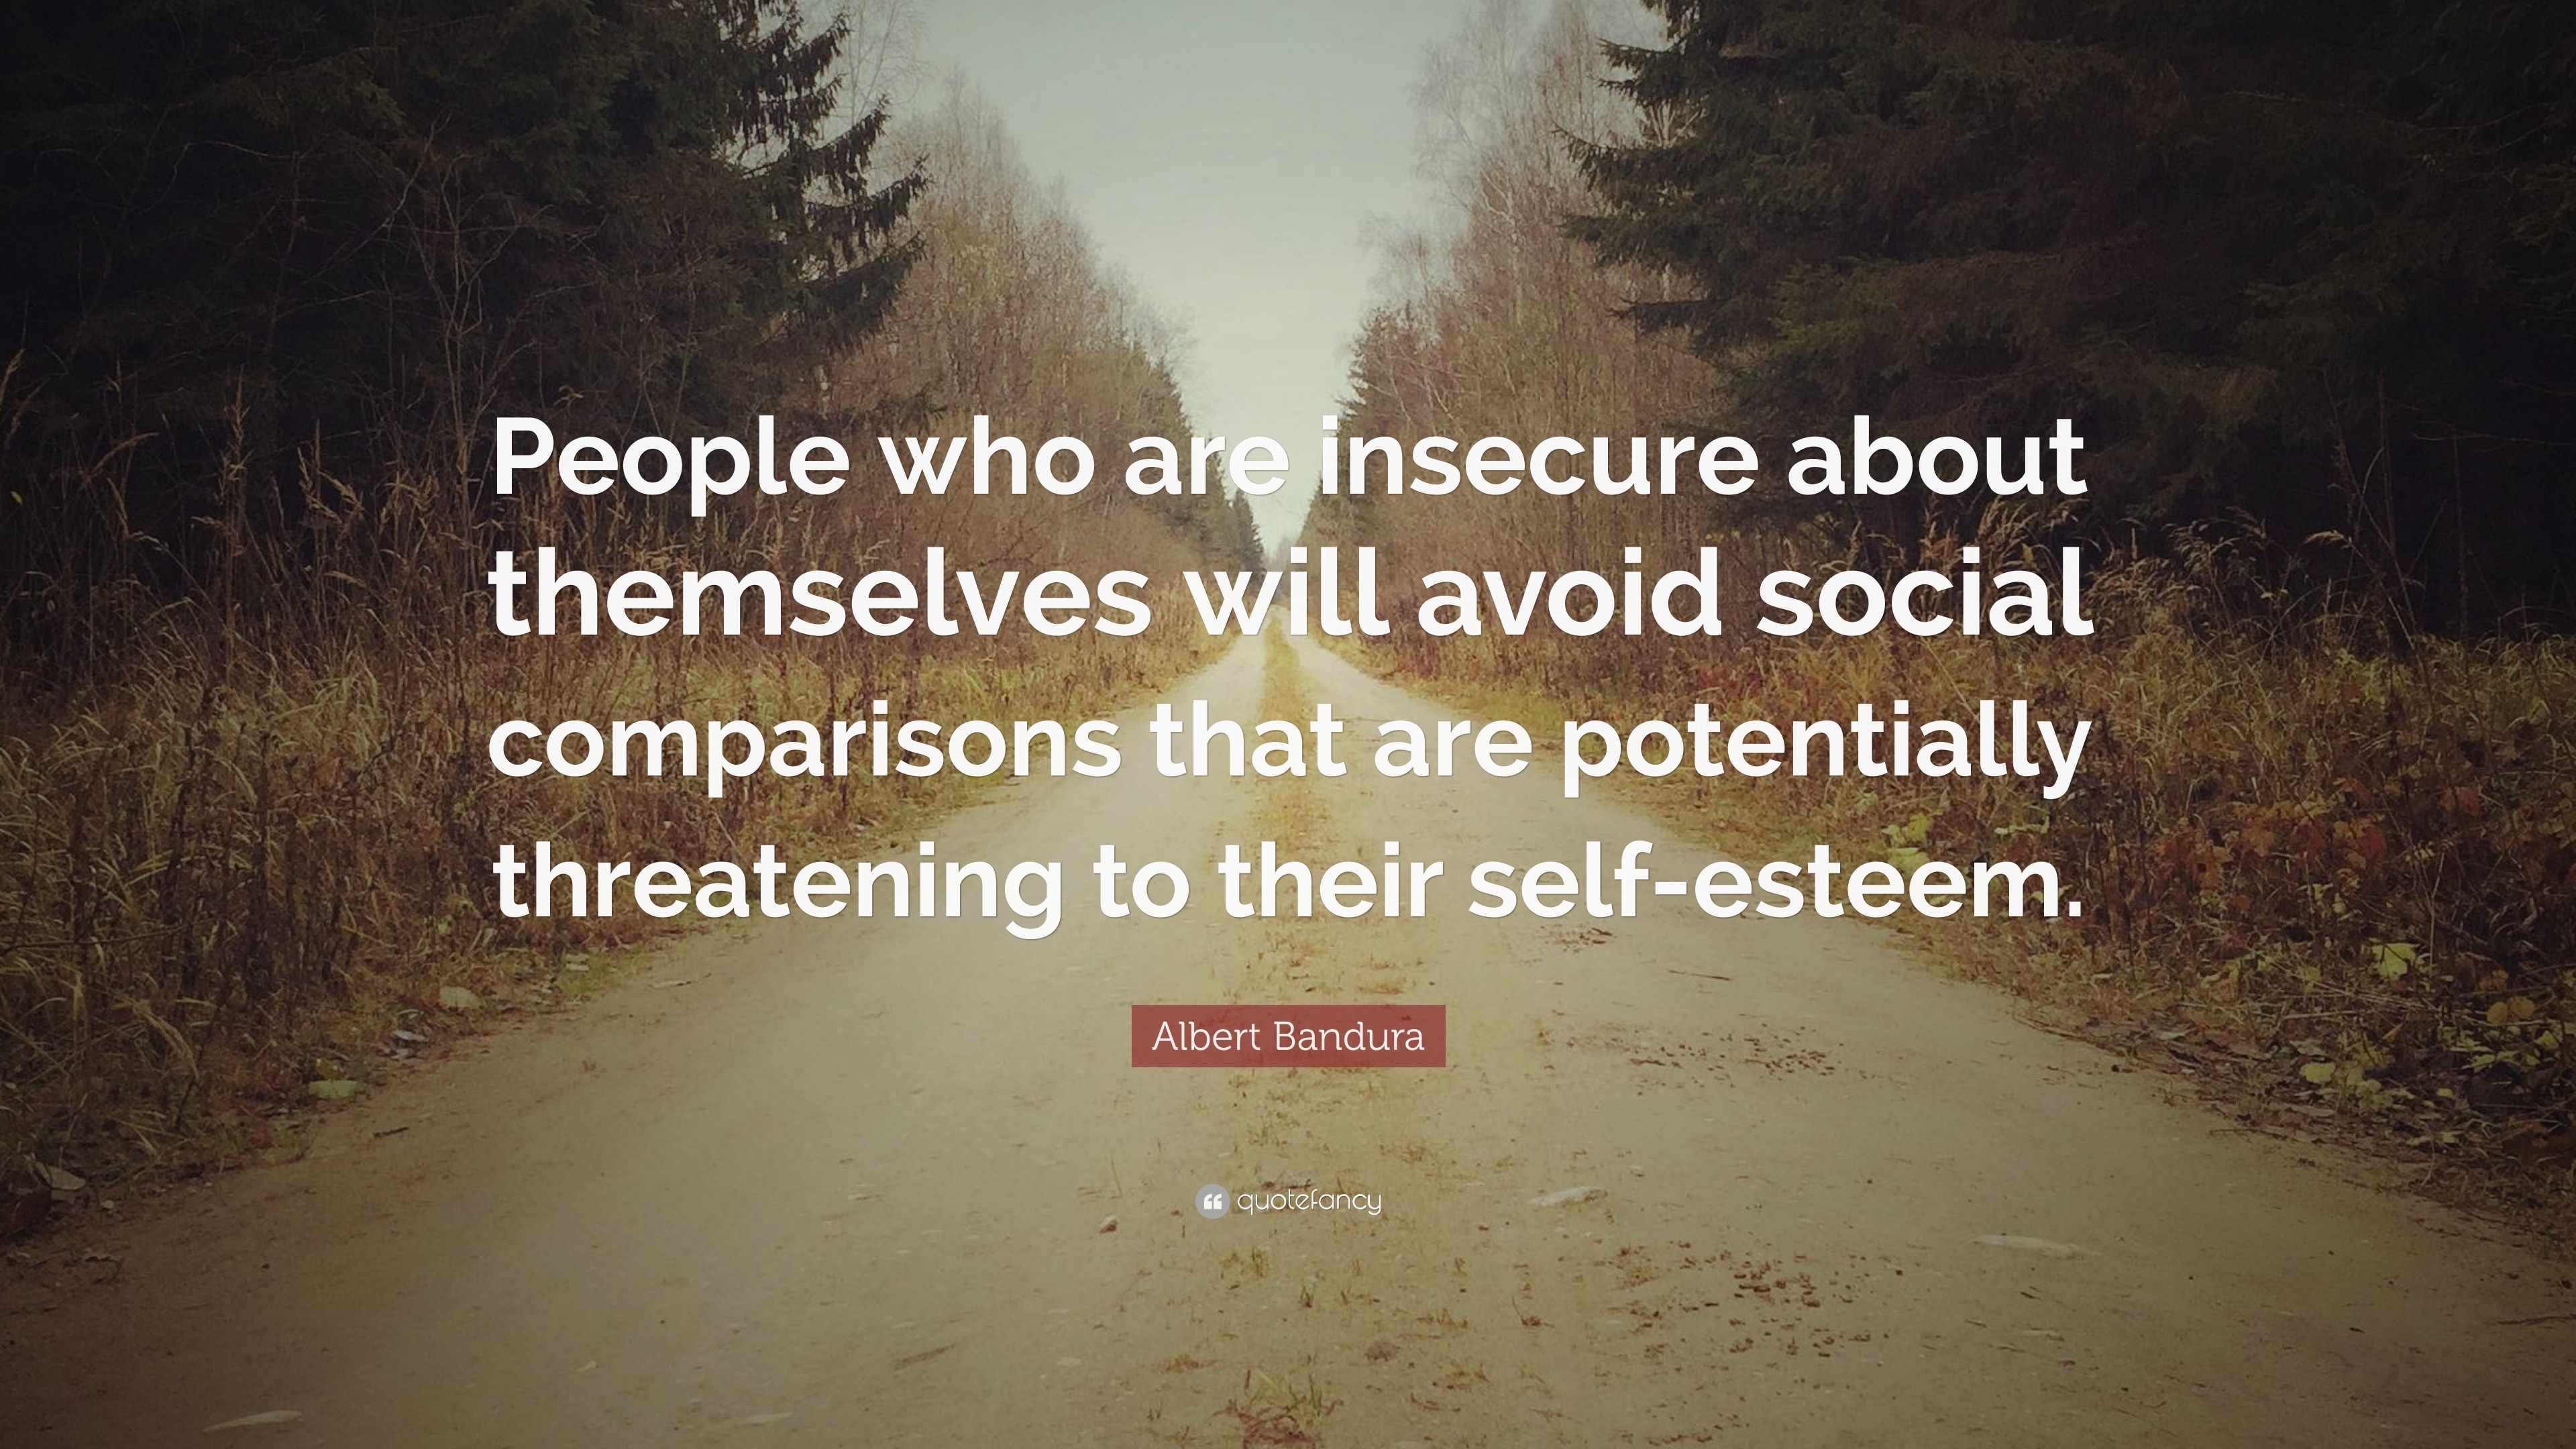 Albert Bandura Quote: “People who are insecure about themselves will ...